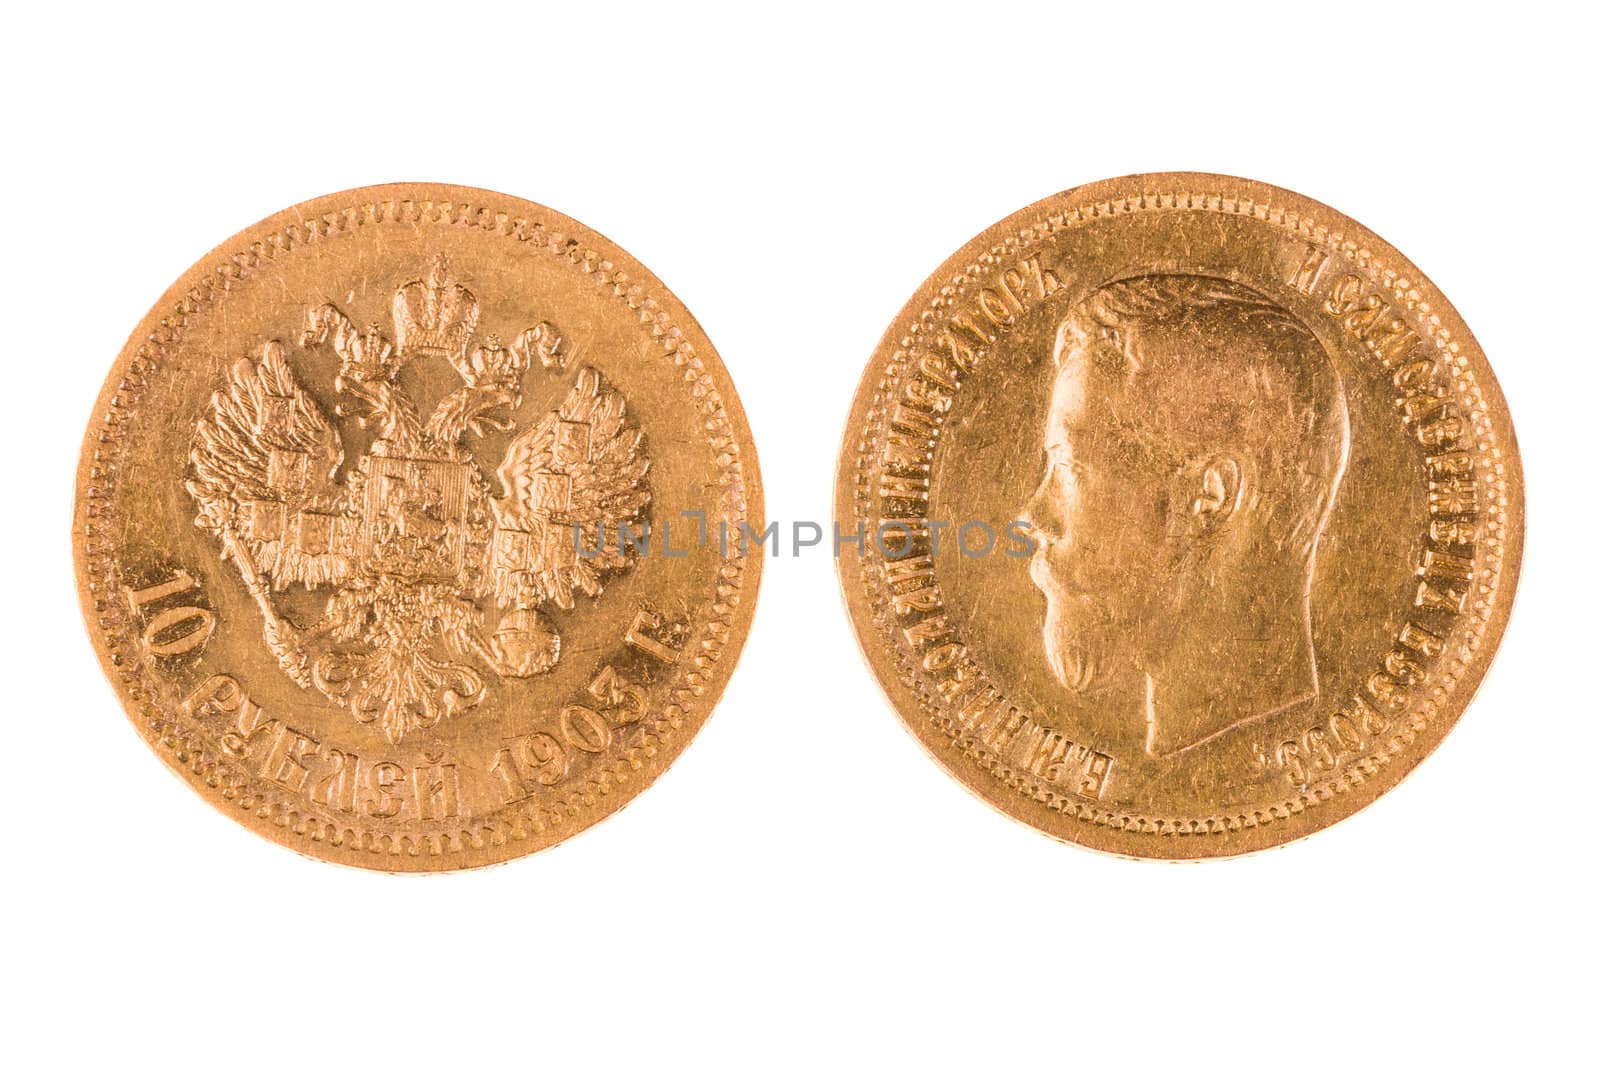 Old gold coin of Russia by Draw05